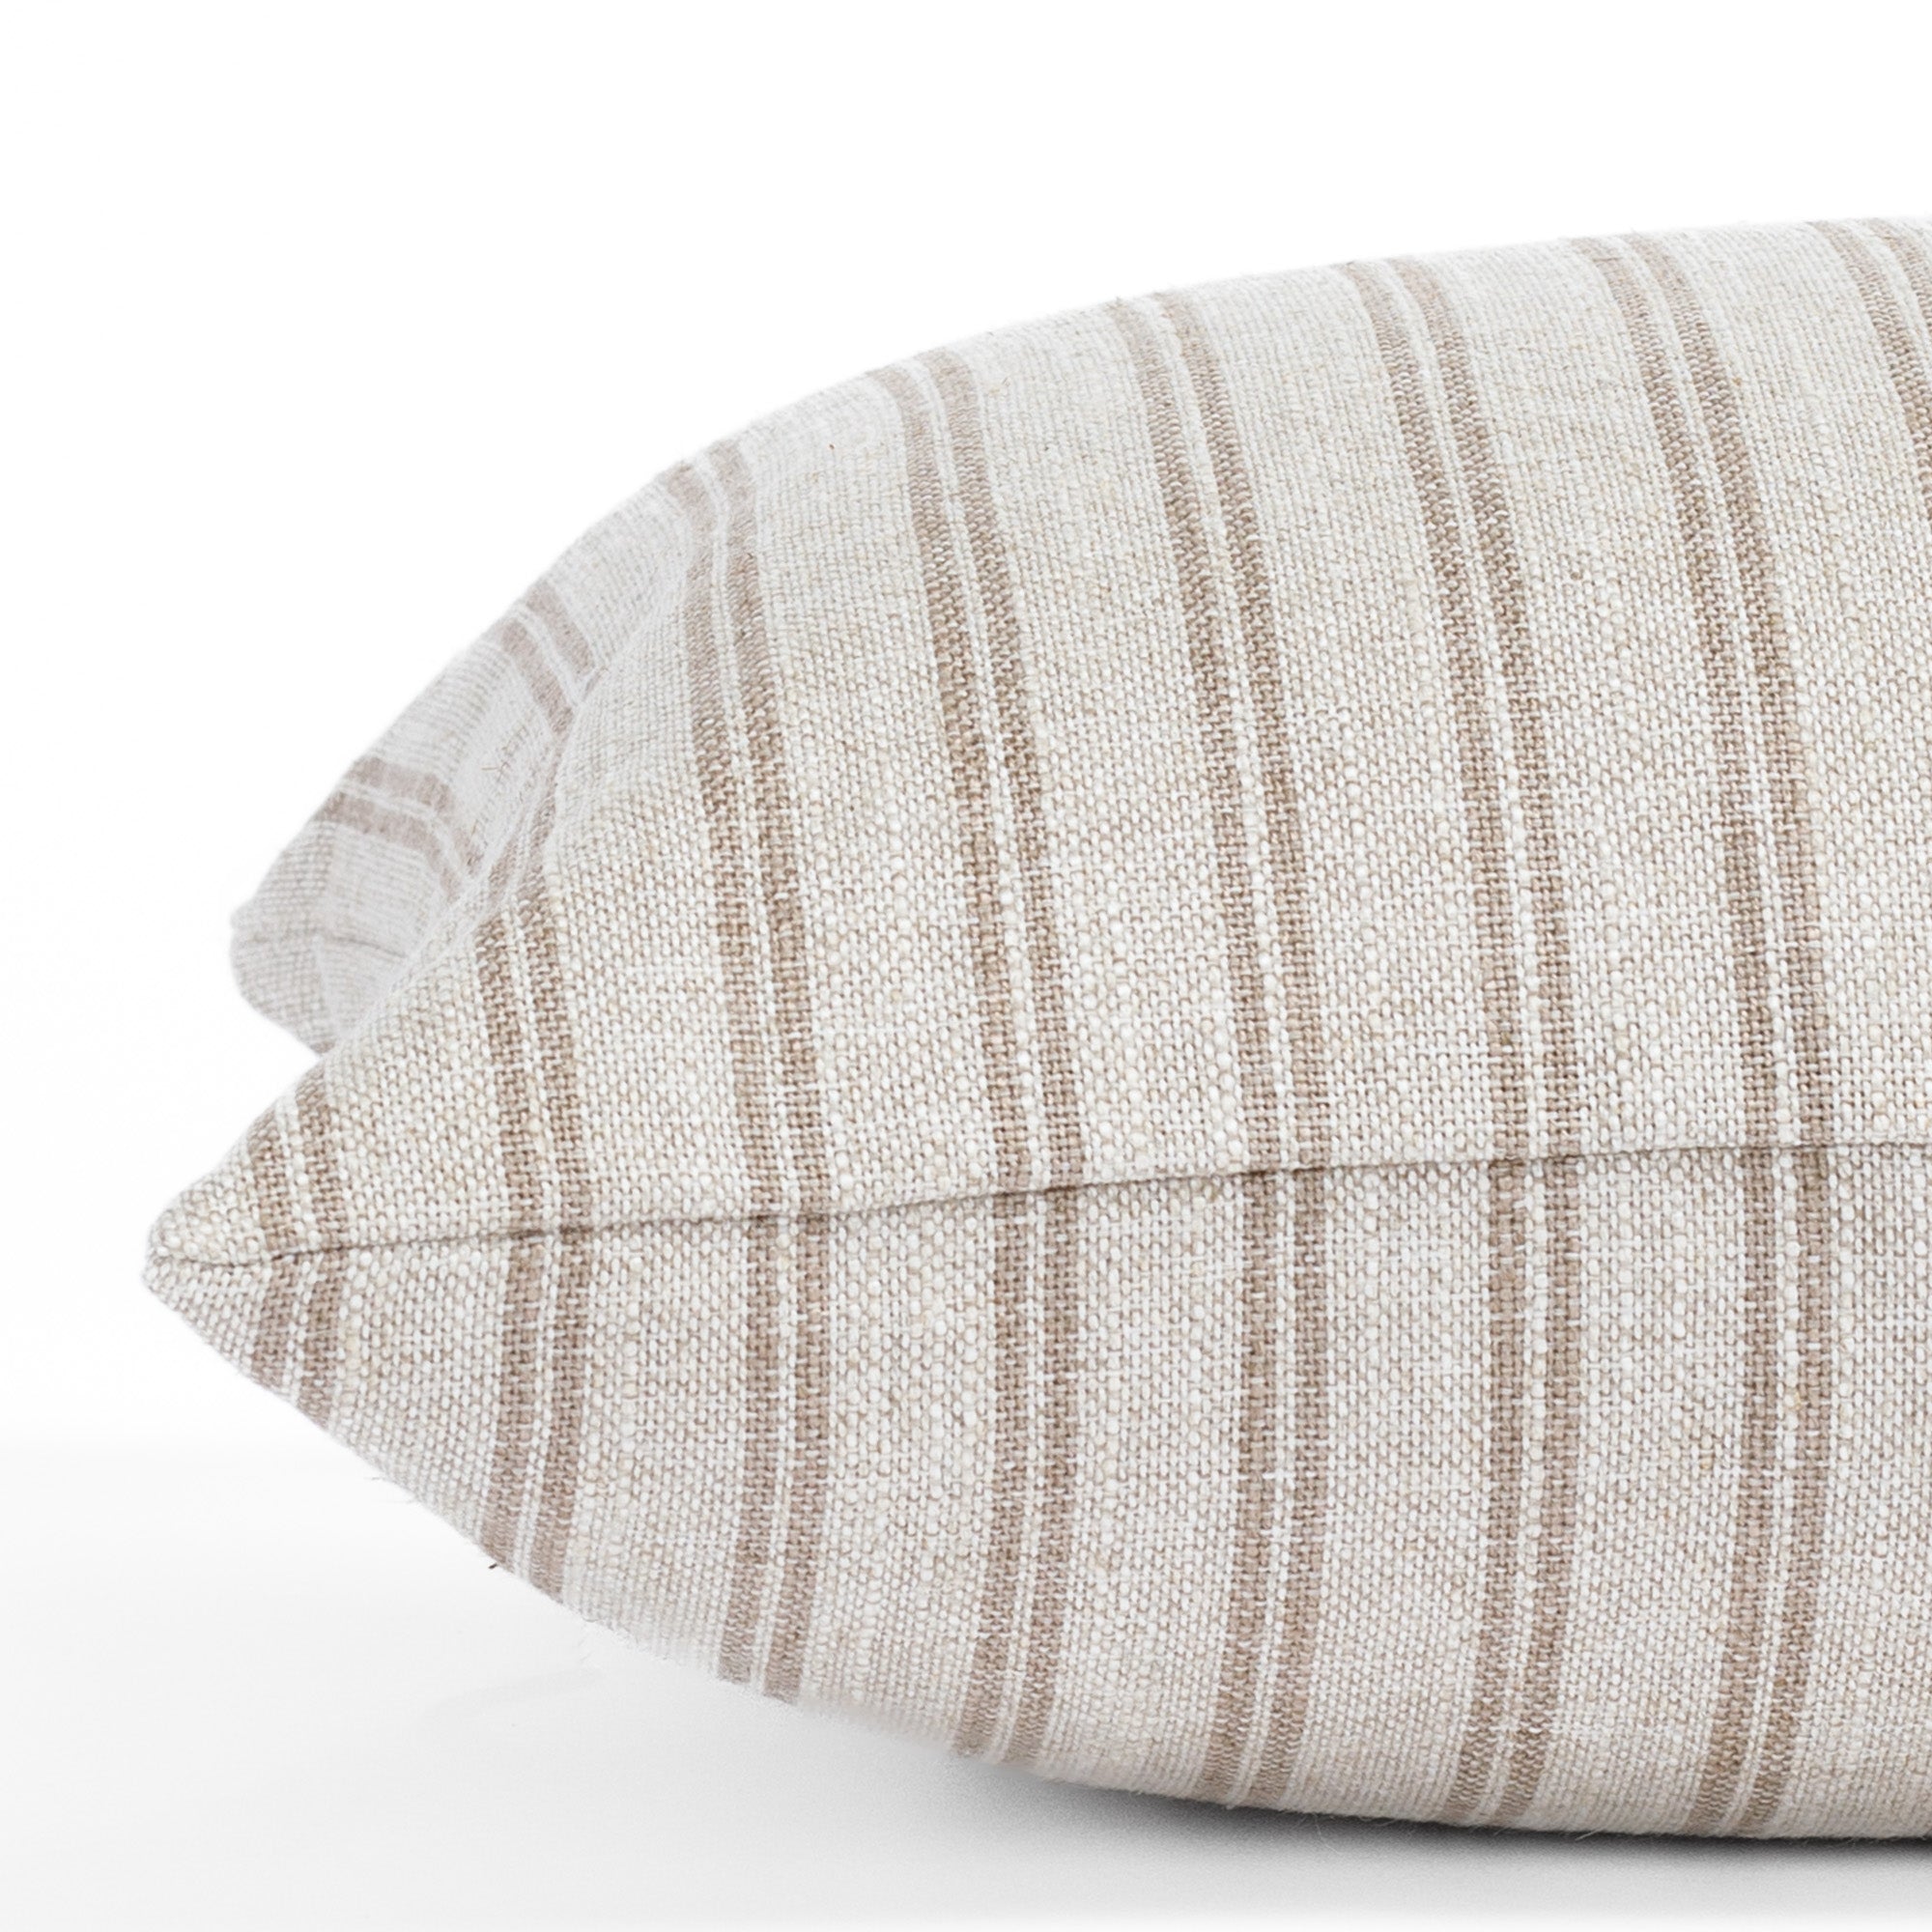 a cream and brown stripe extra long lumbar pillow : close up side view